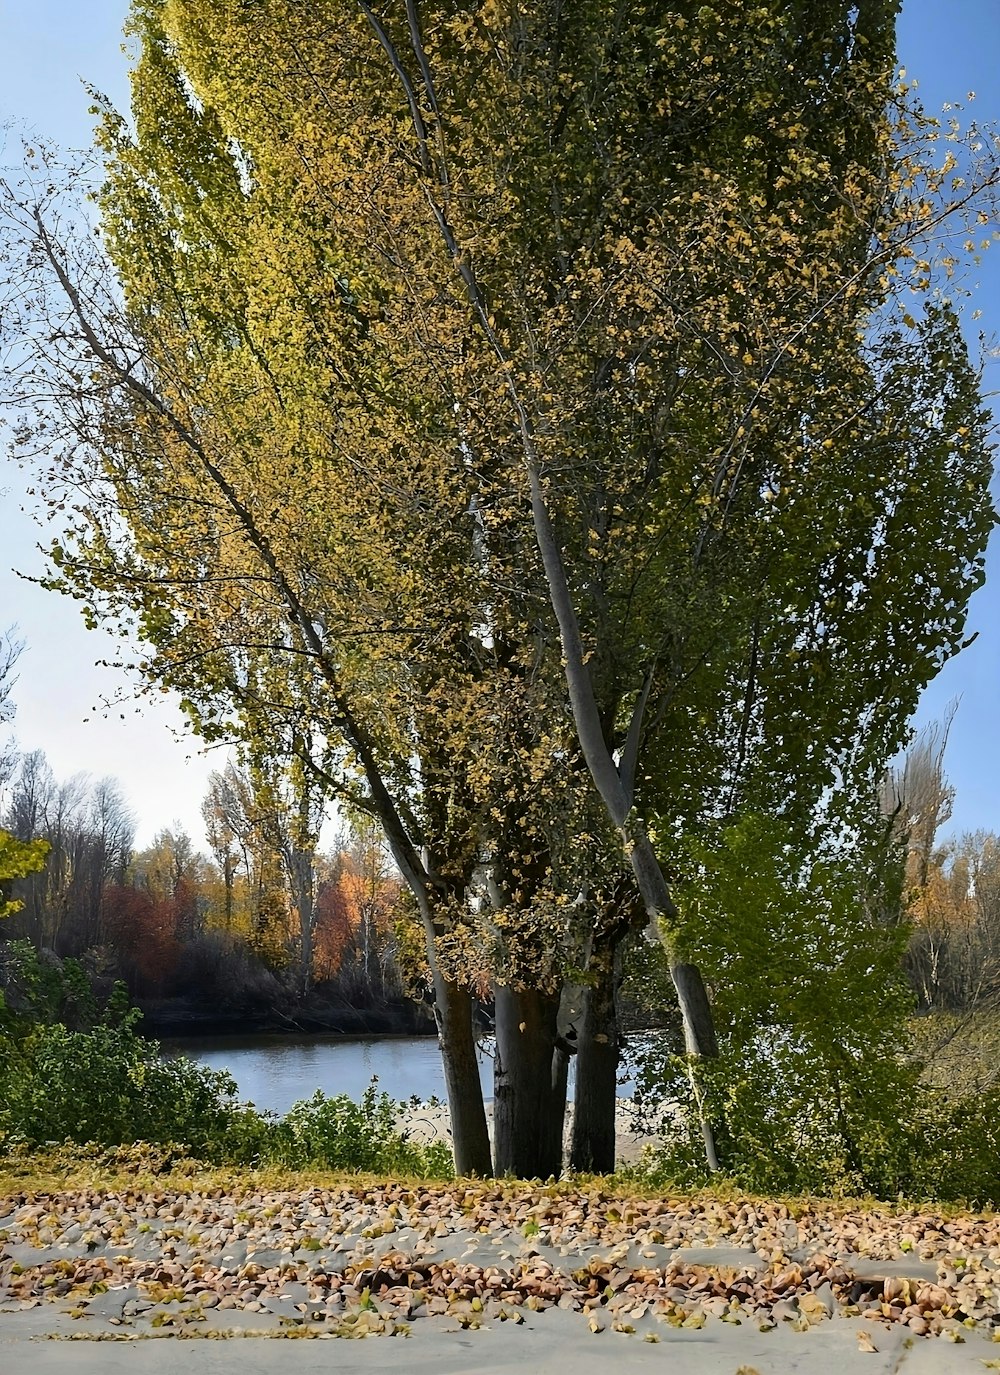 a park bench under a tree next to a lake